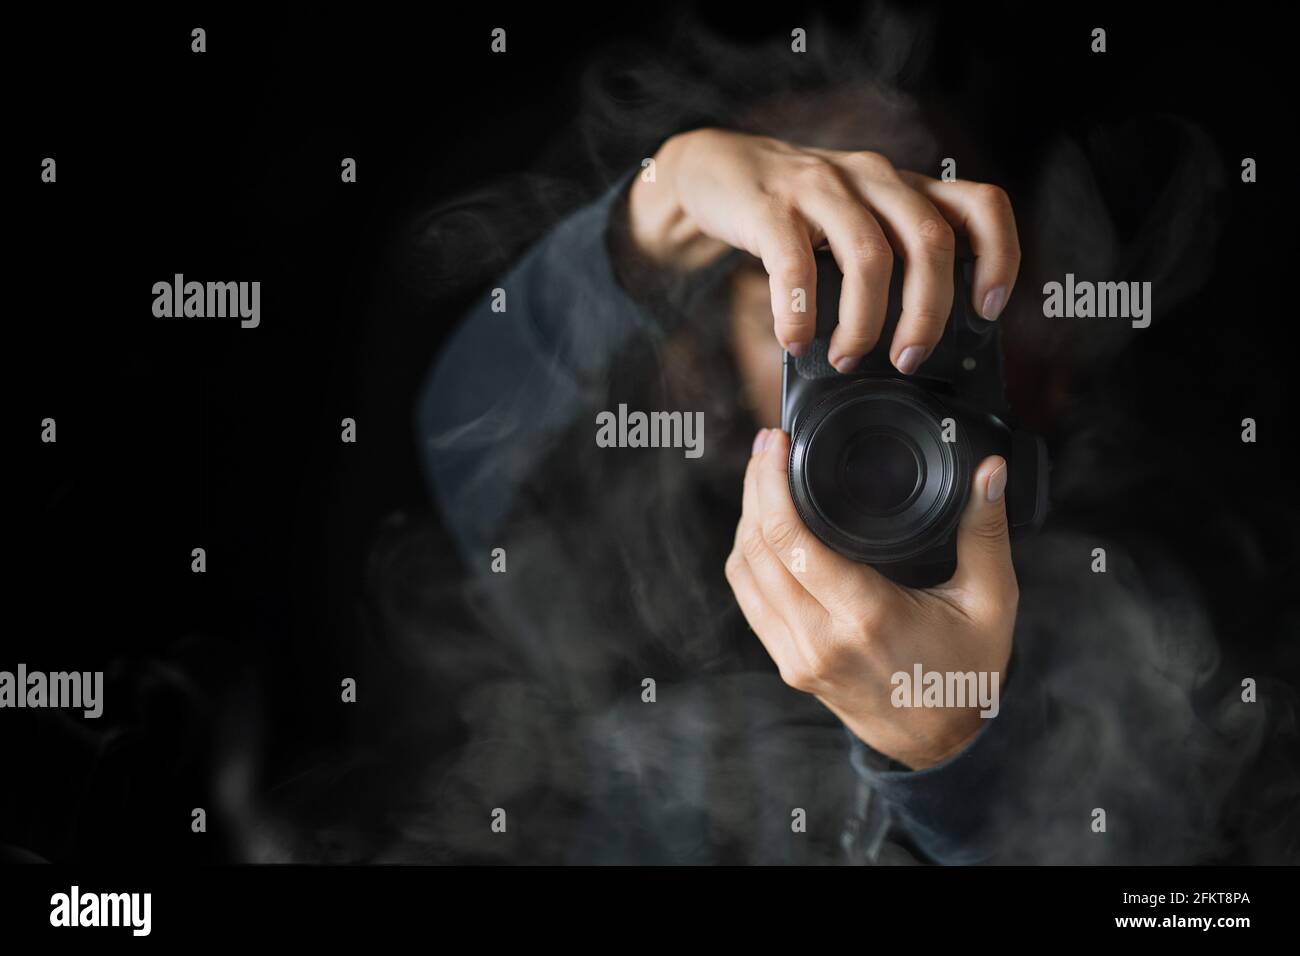 Woman's hands held photo camera. Close up shot. A person in black hoodie and smoke around Stock Photo